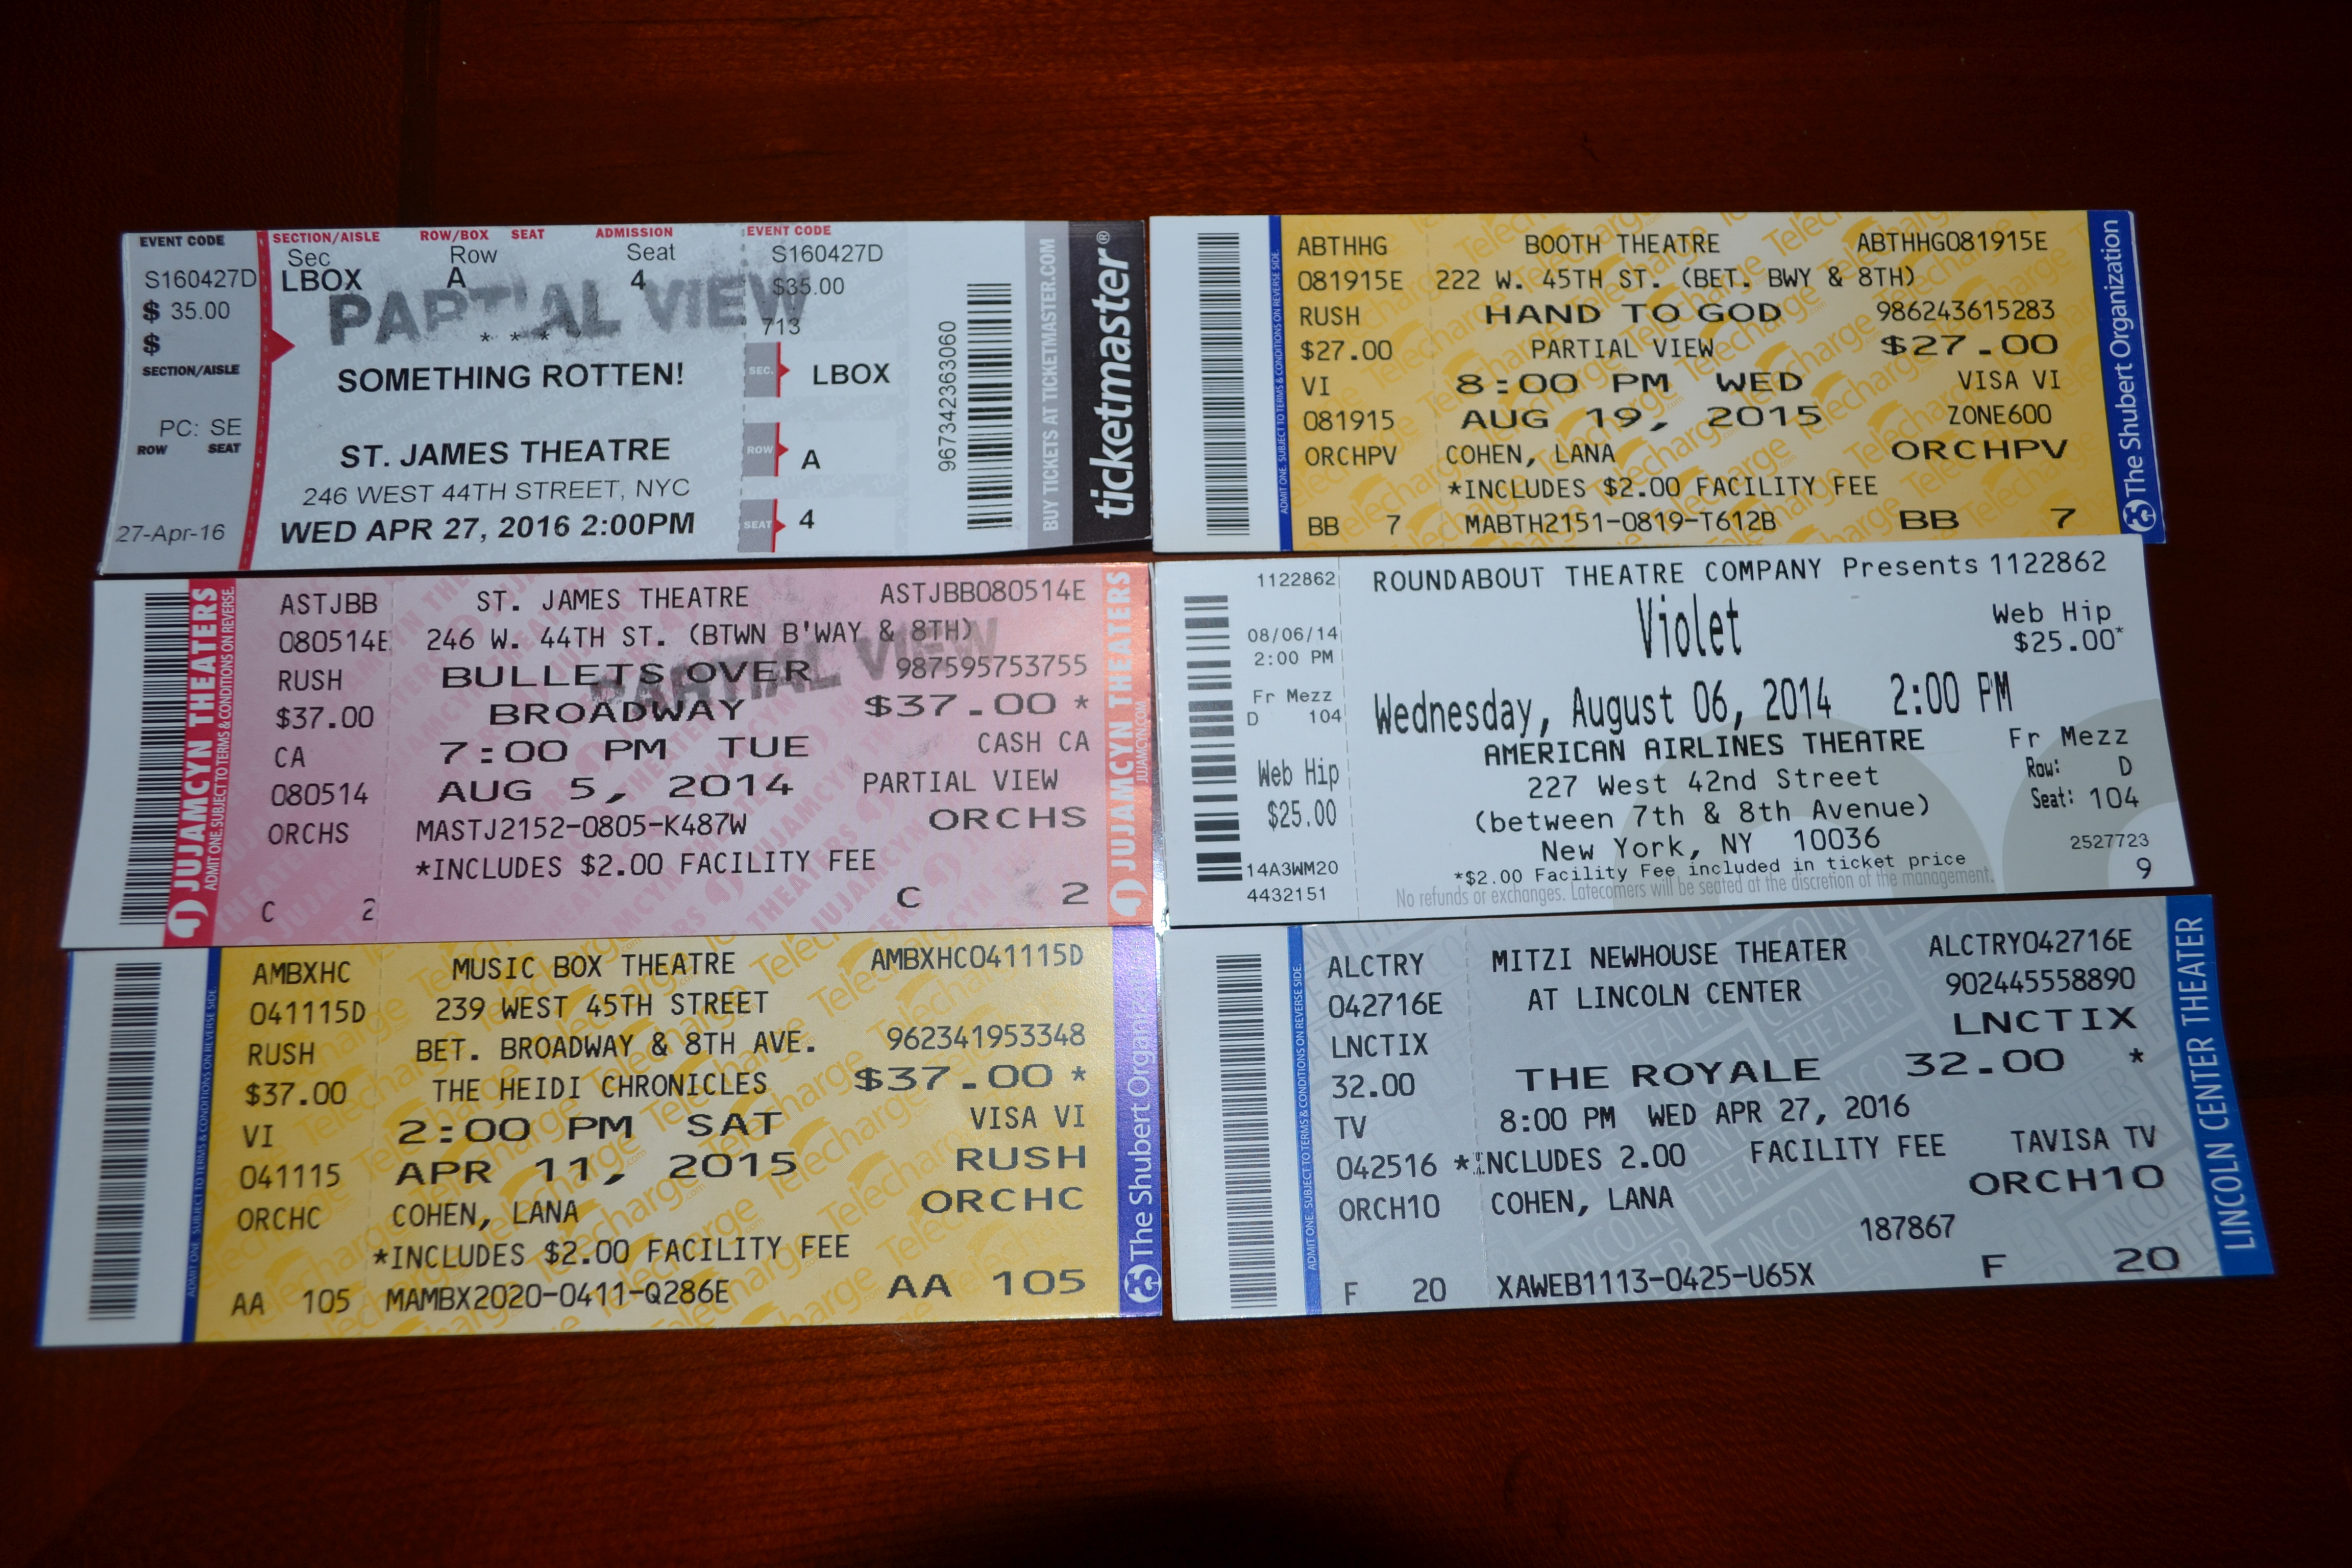 A variety of Broadway ticket stubs I've racked up on the cheap since living in Milan (including HIPTIX & LincTix!)